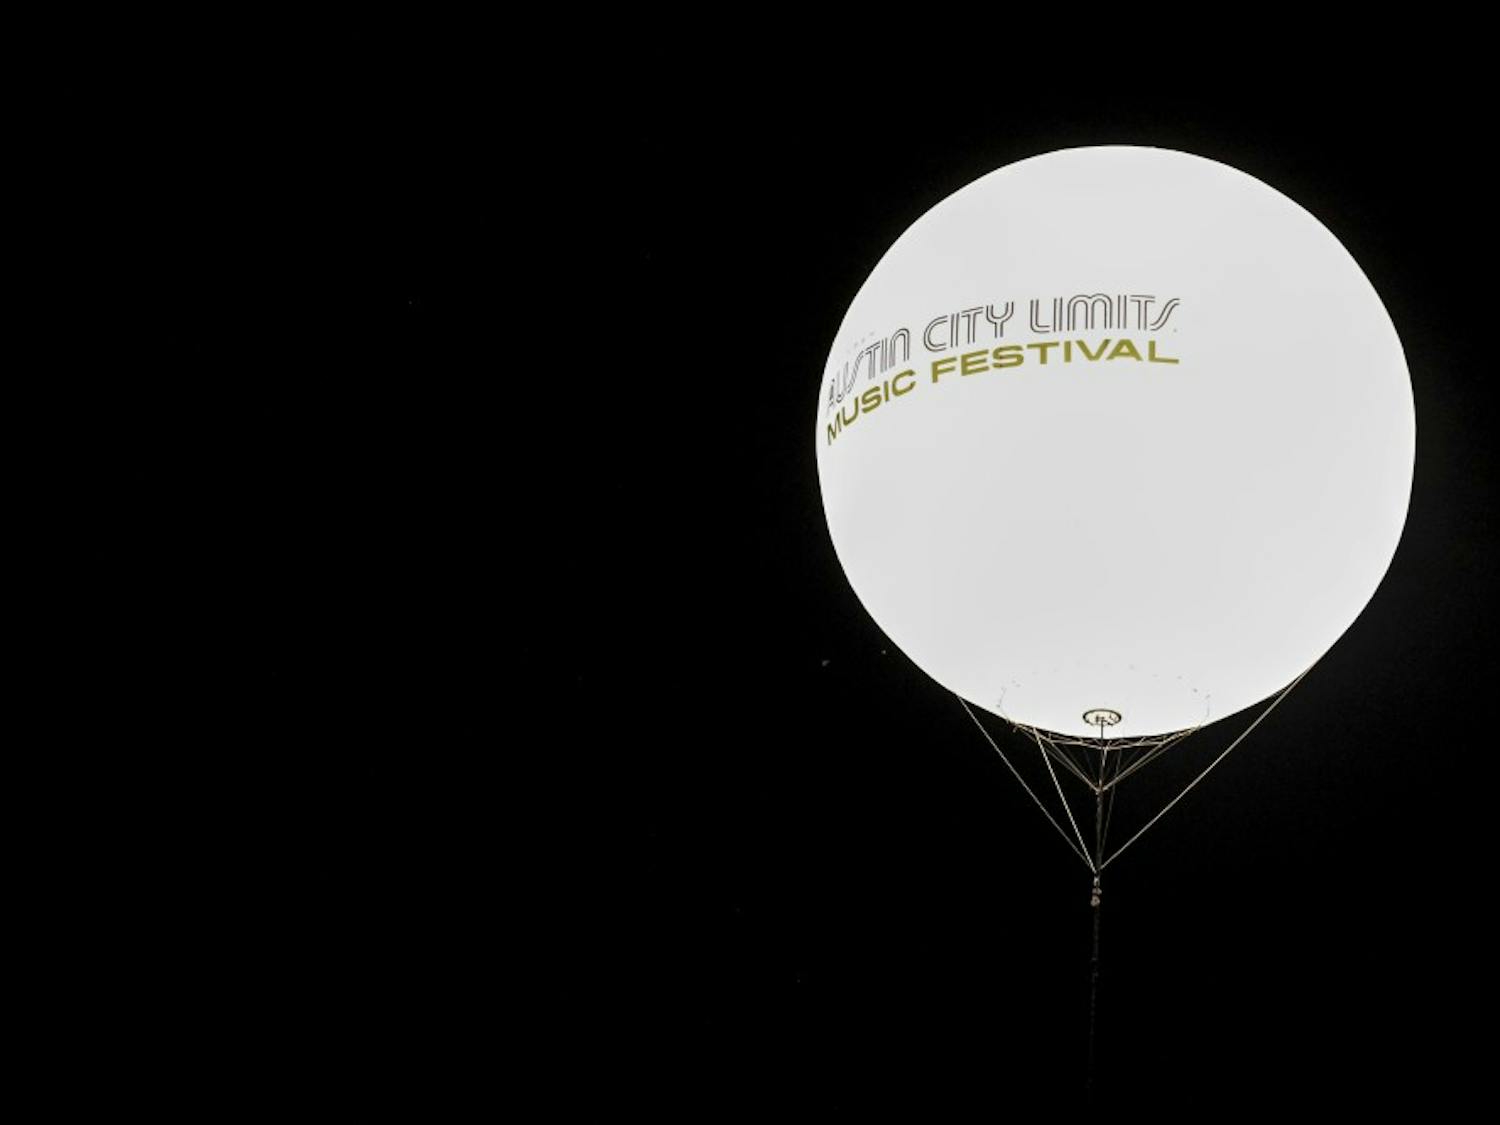 As the days at ACL come to a close large balloons with ACL's logo float into the sky and light up the surrounding area.